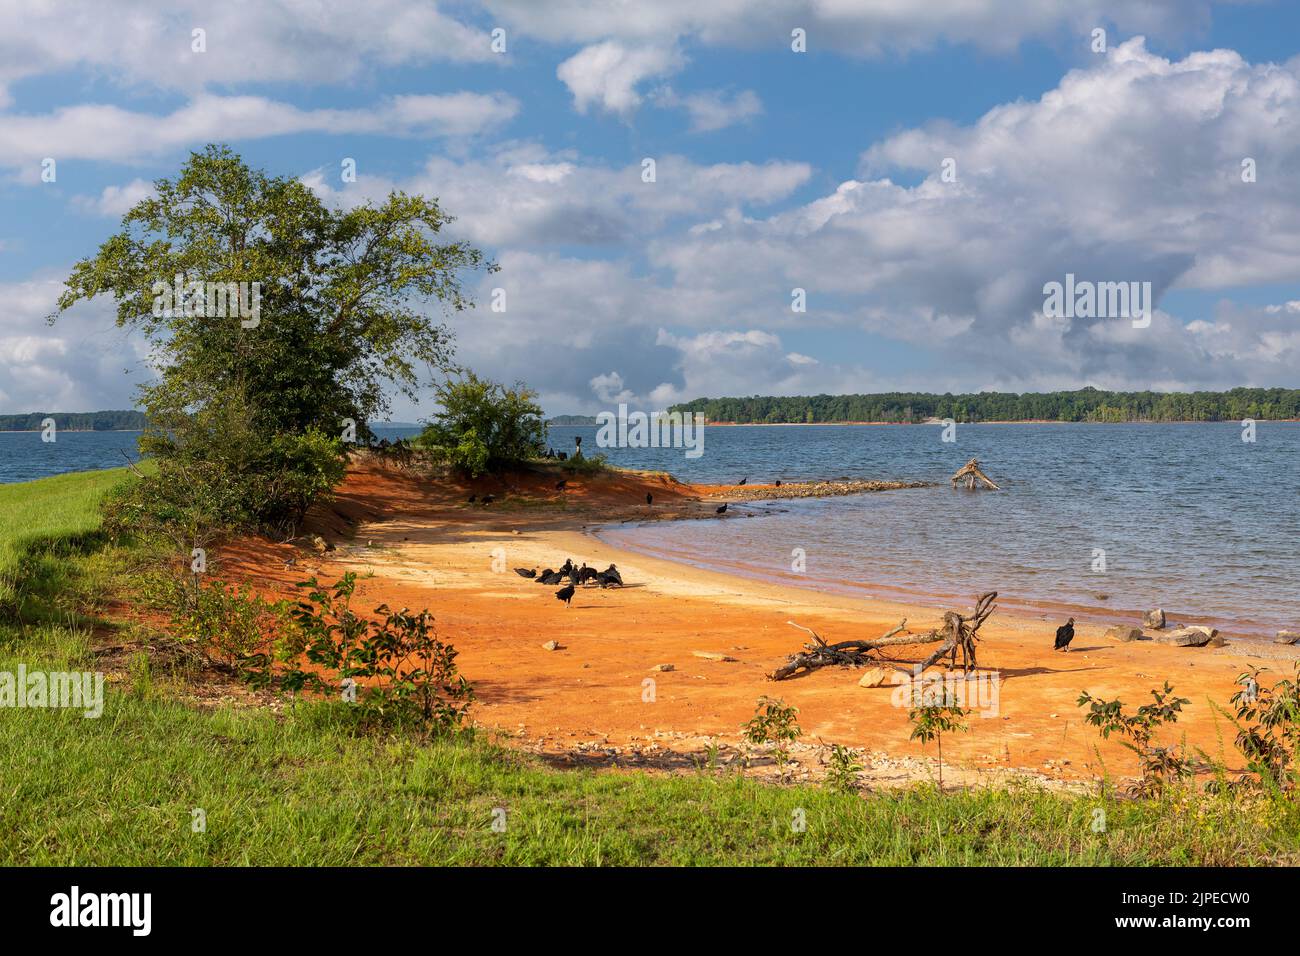 Beautiful Kerr Lake in Virginia US. Manmade lake lined with sandy beaches surrounded by forests. Created by damming the river Dan. Stock Photo